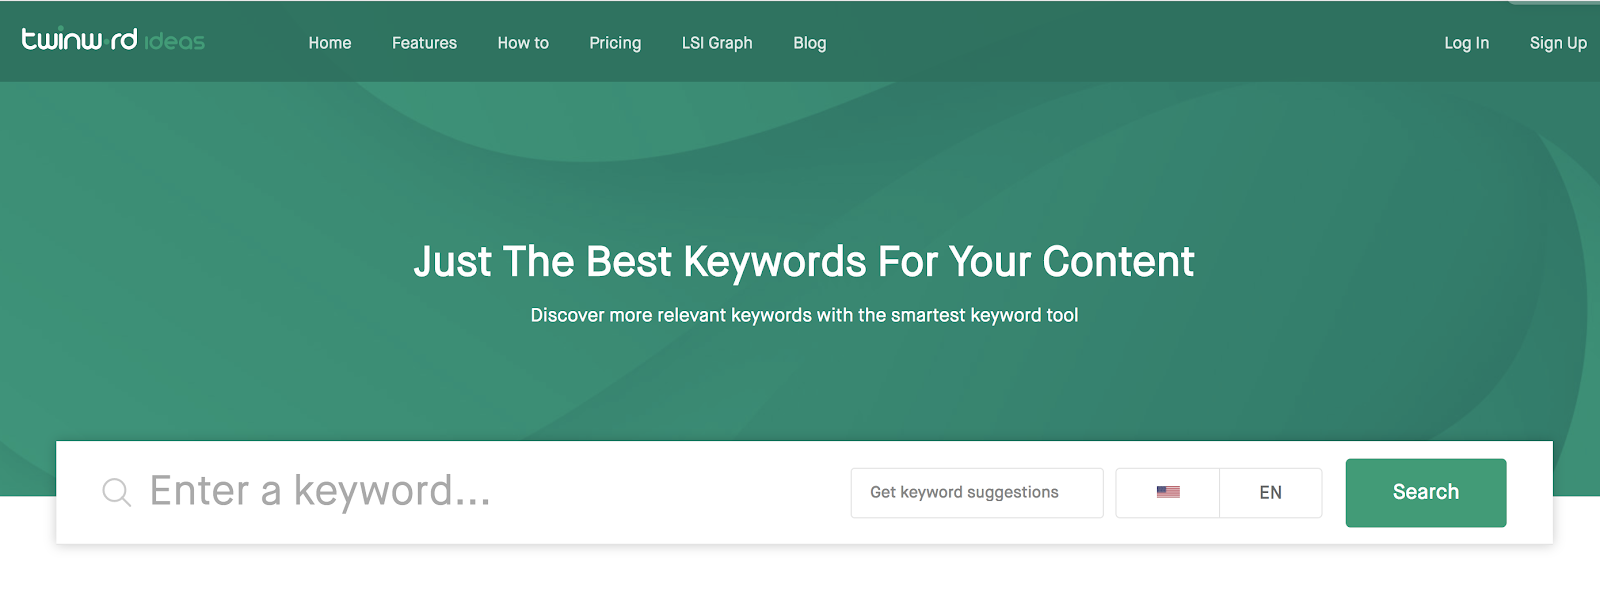 Twinword Ideas Free Keyword Research Tool for Bloggers